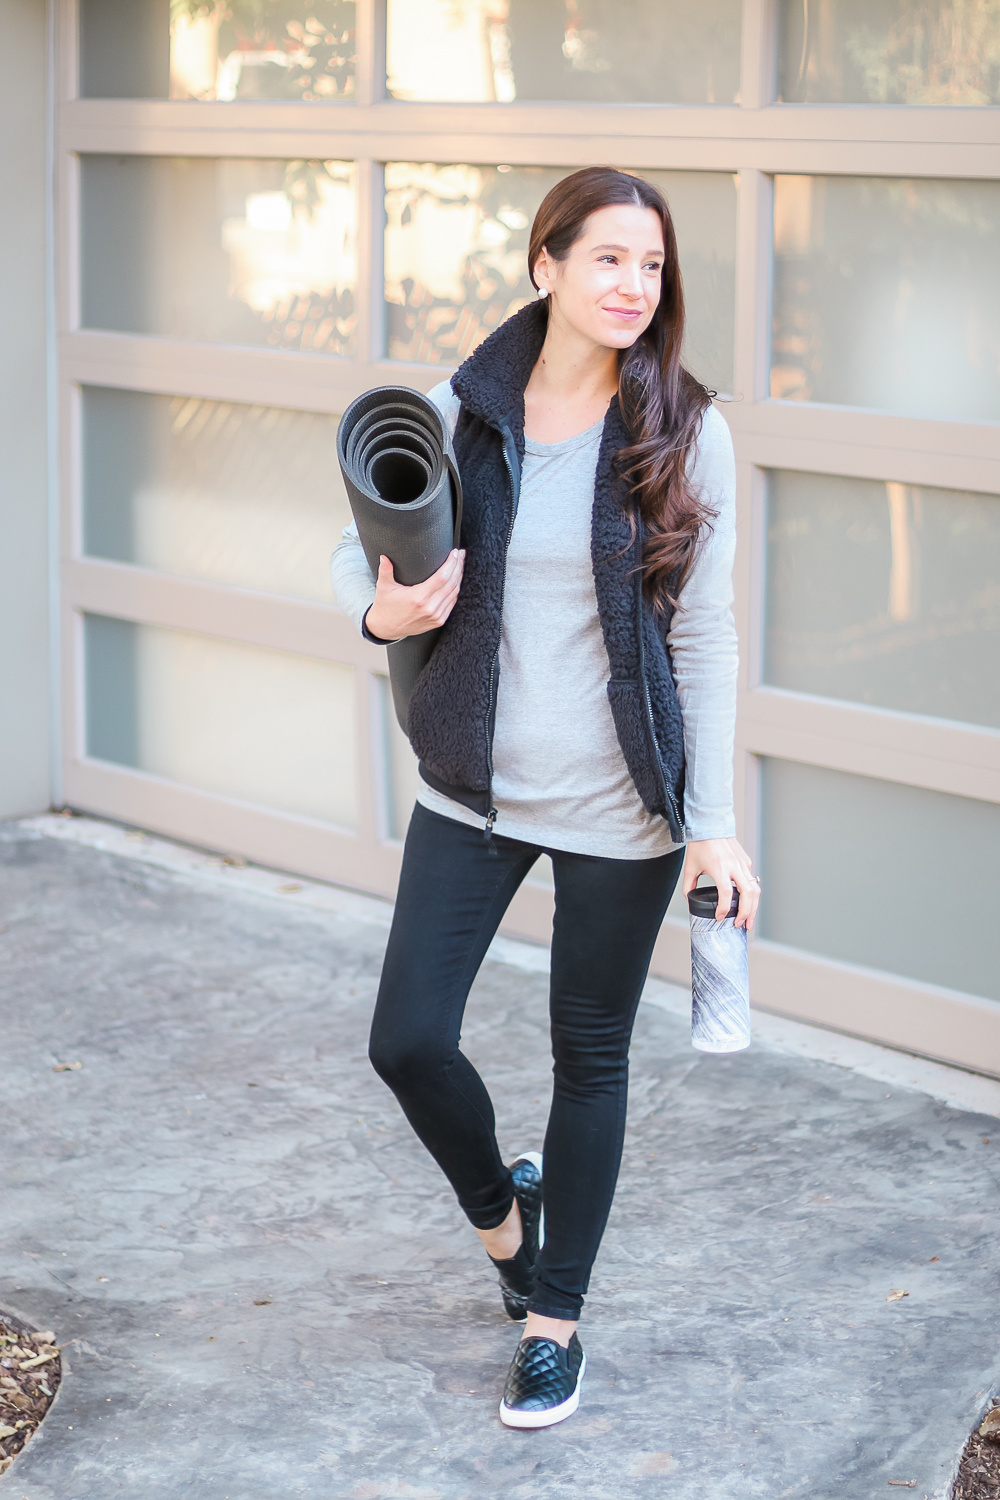 Shopping Haul: Best Walmart Fall Fashion Finds by affordable fashion blogger Stephanie Ziajka on Diary of a Debutante, black Time and Tru plush vest, gray Time and Tru long sleeve crew tee, black Time and Tru Twin Gore Slip-On Sneakers, Contigo Couture SNAPSEAL Thermal Mug in Black Shell